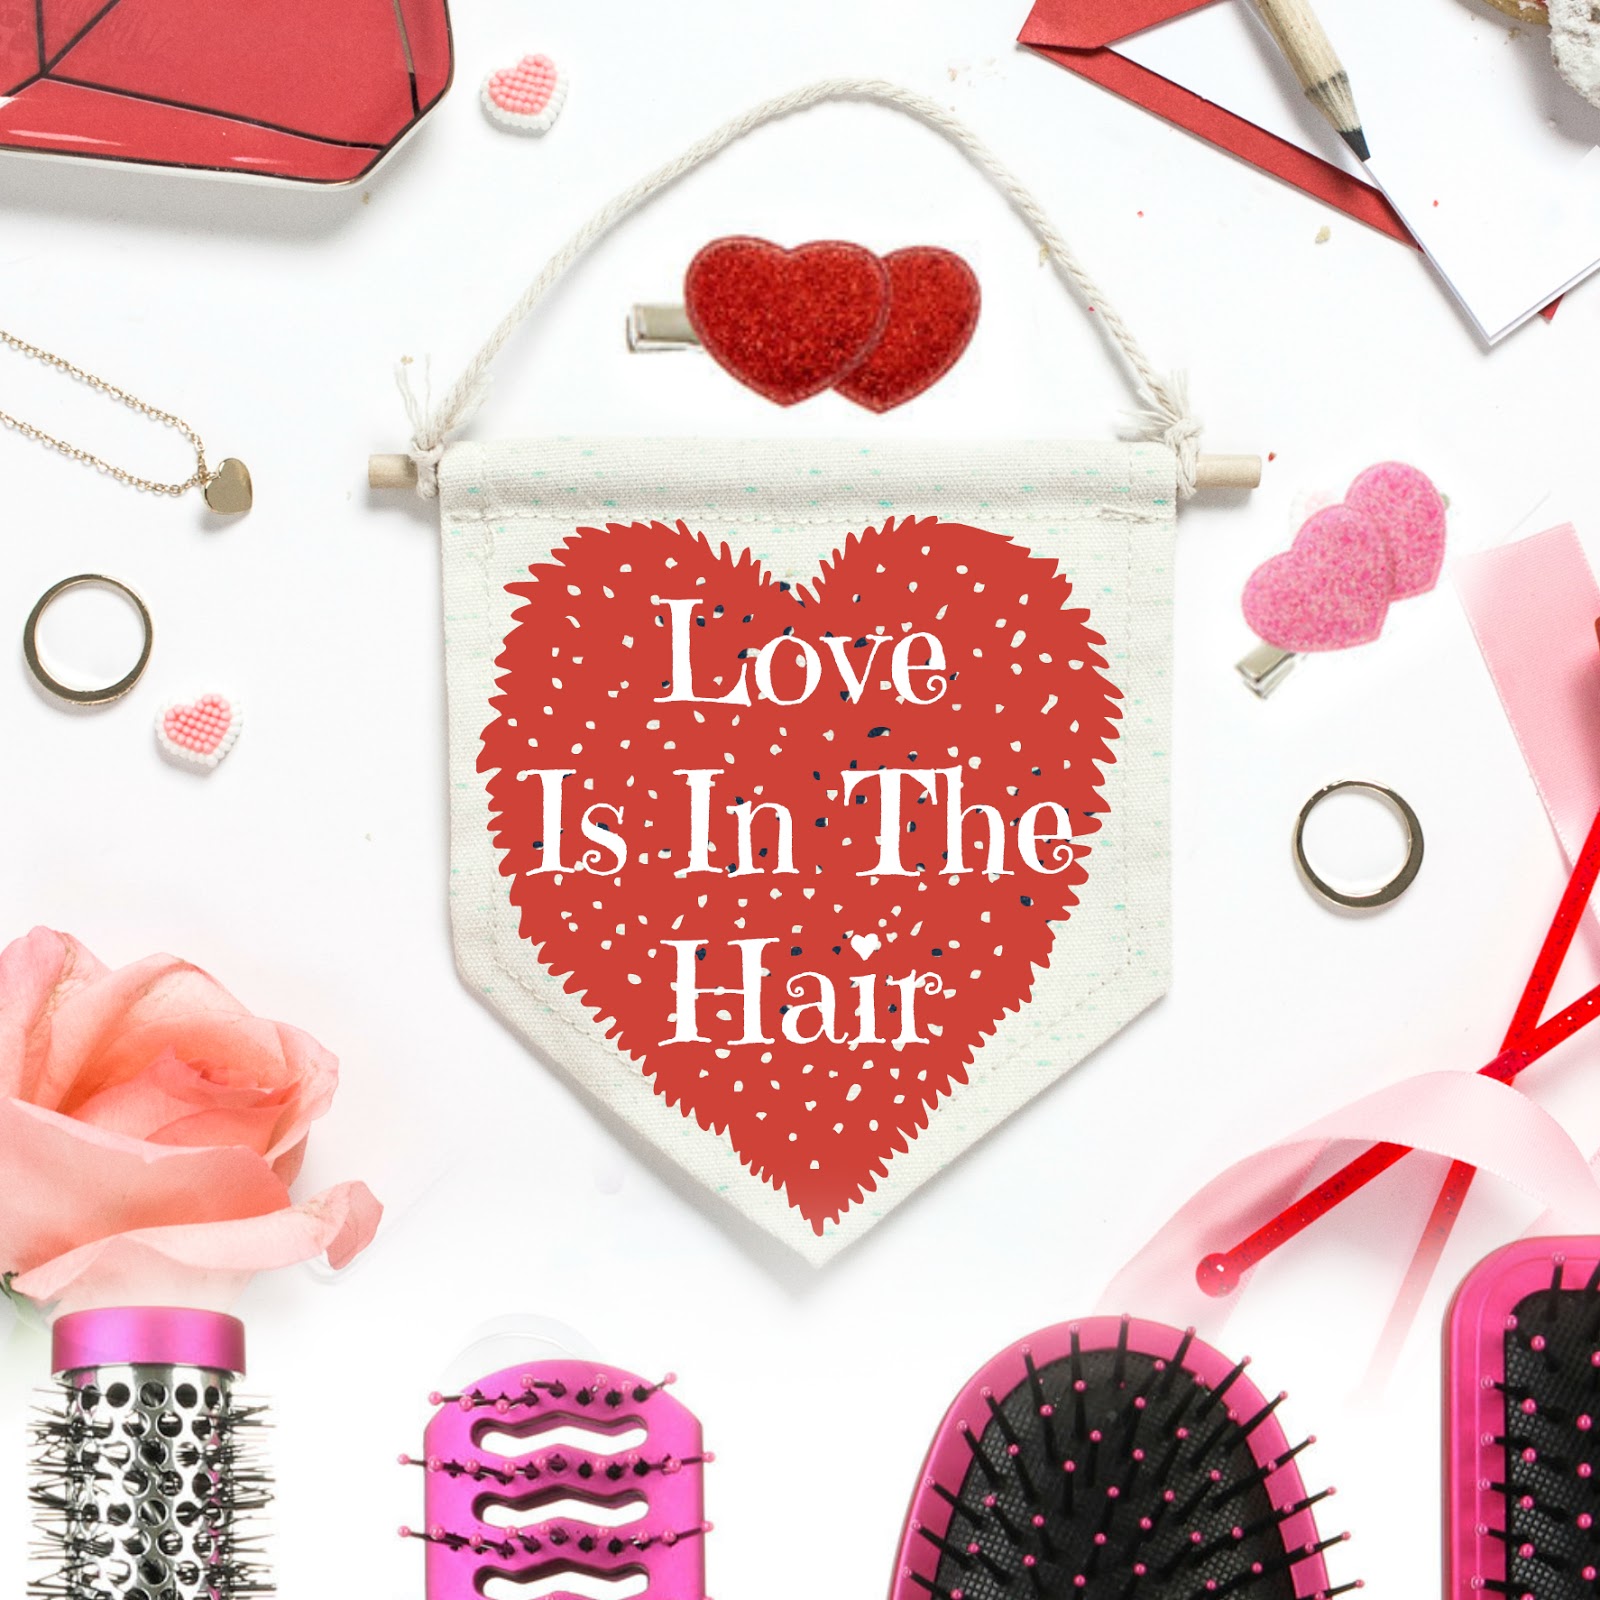 Tips To Getting Your Hair Ready For Valentine's: Hairstyles, Accessories  And Care | Barbie's Beauty Bits